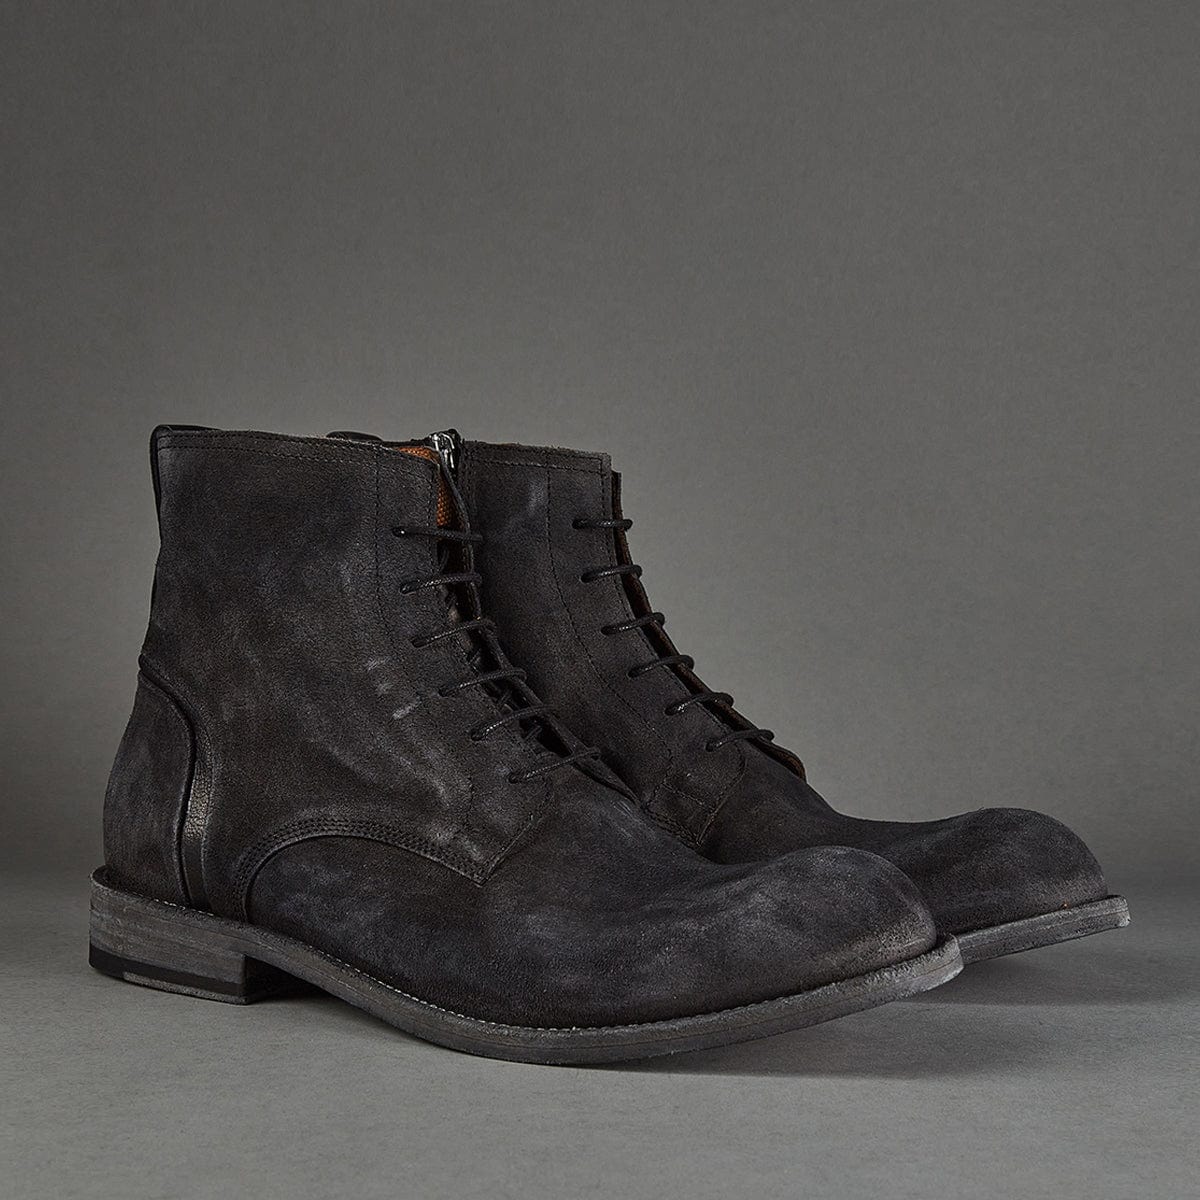 Conflict For Interest Ankle Boot Conflict For Interest Catanzaro Black